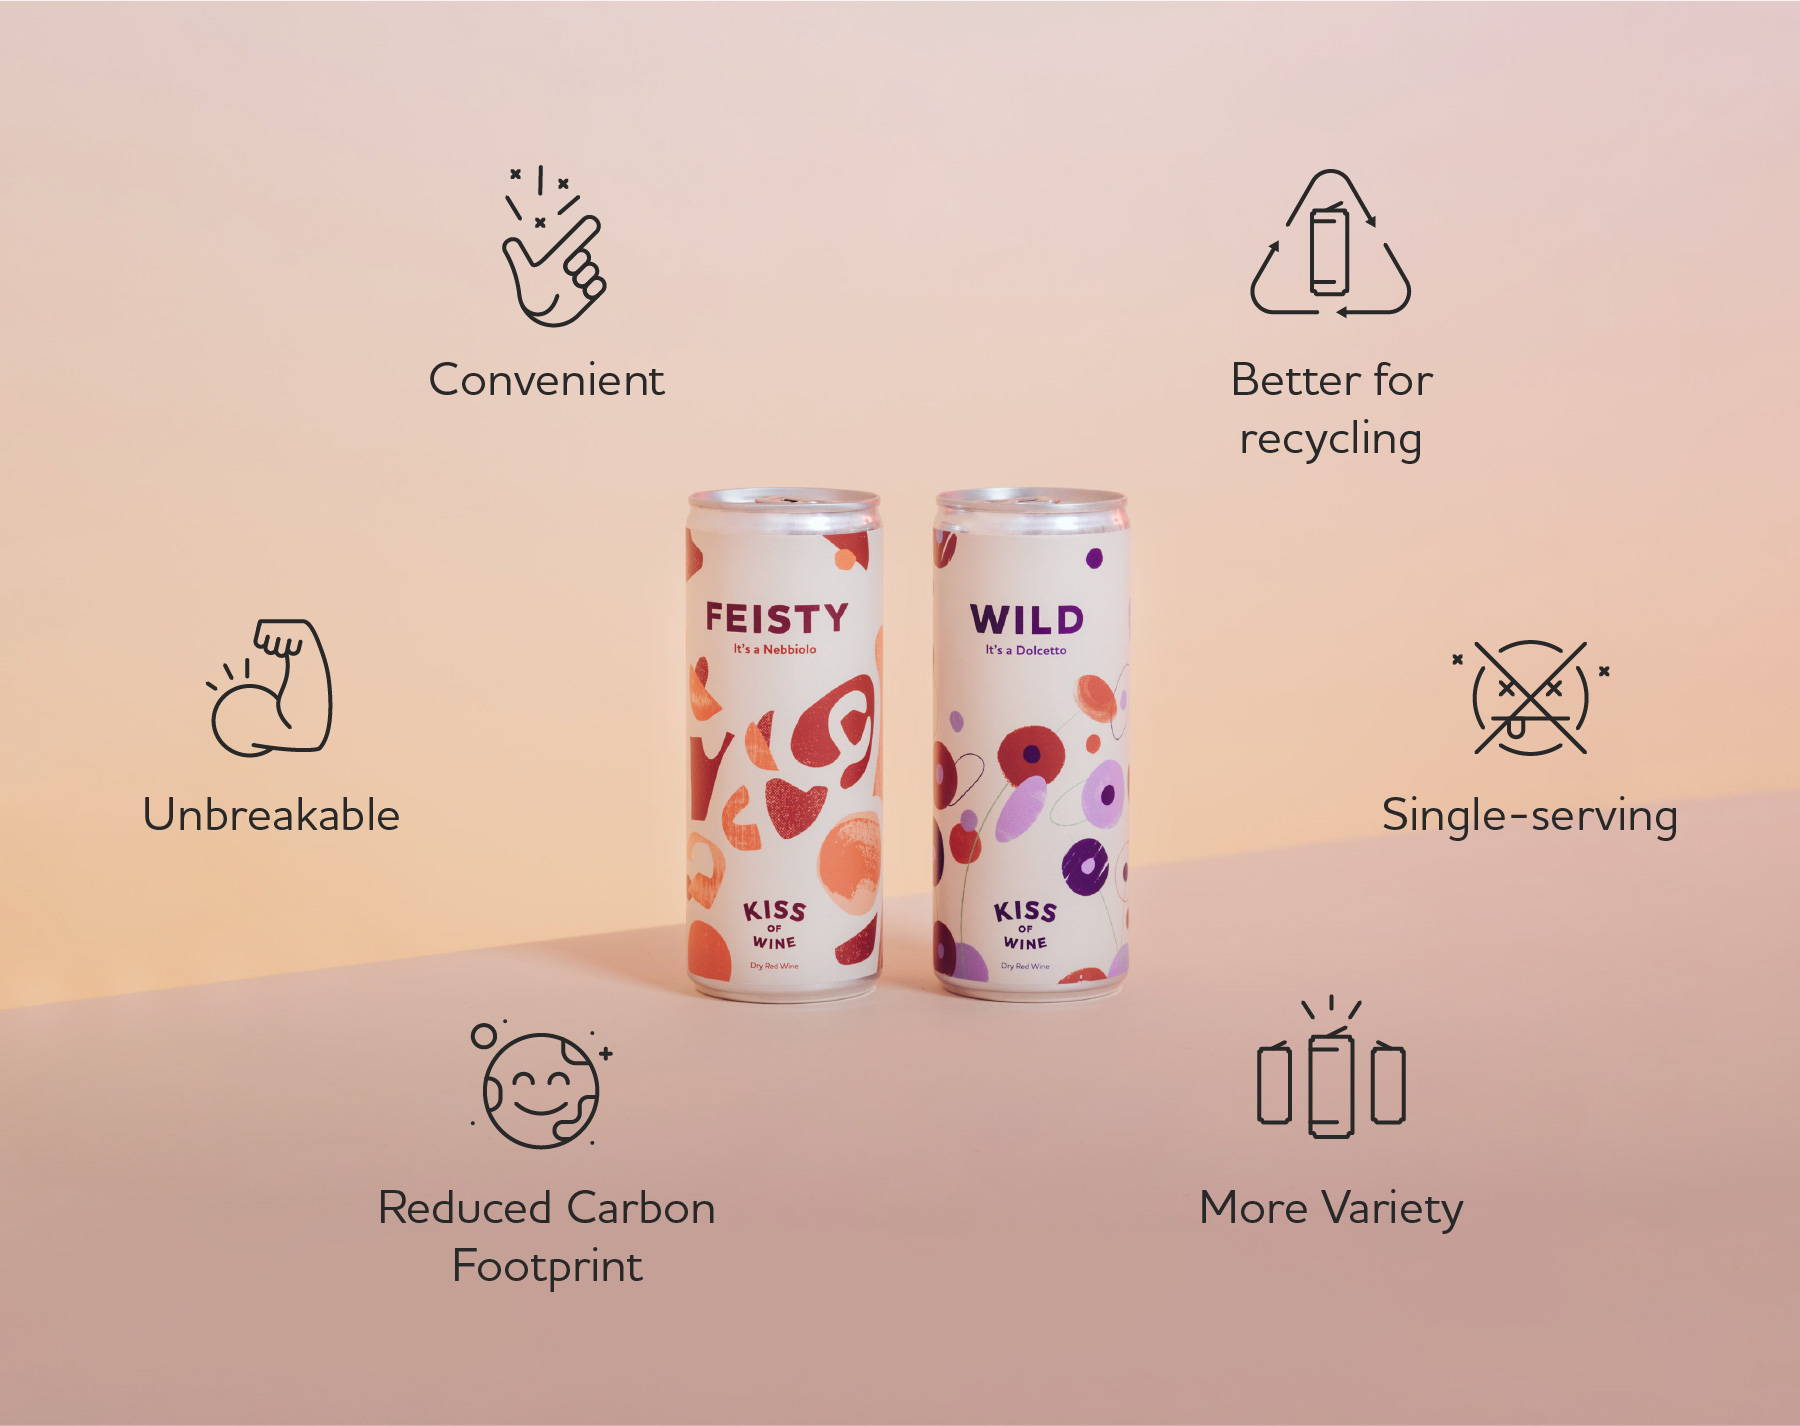 Feisty and Wild wine cans centred around the benefits of canning wine - convenient, better for recycling, single-serving, more variety, reduced carbon footprint and unbreakable. 